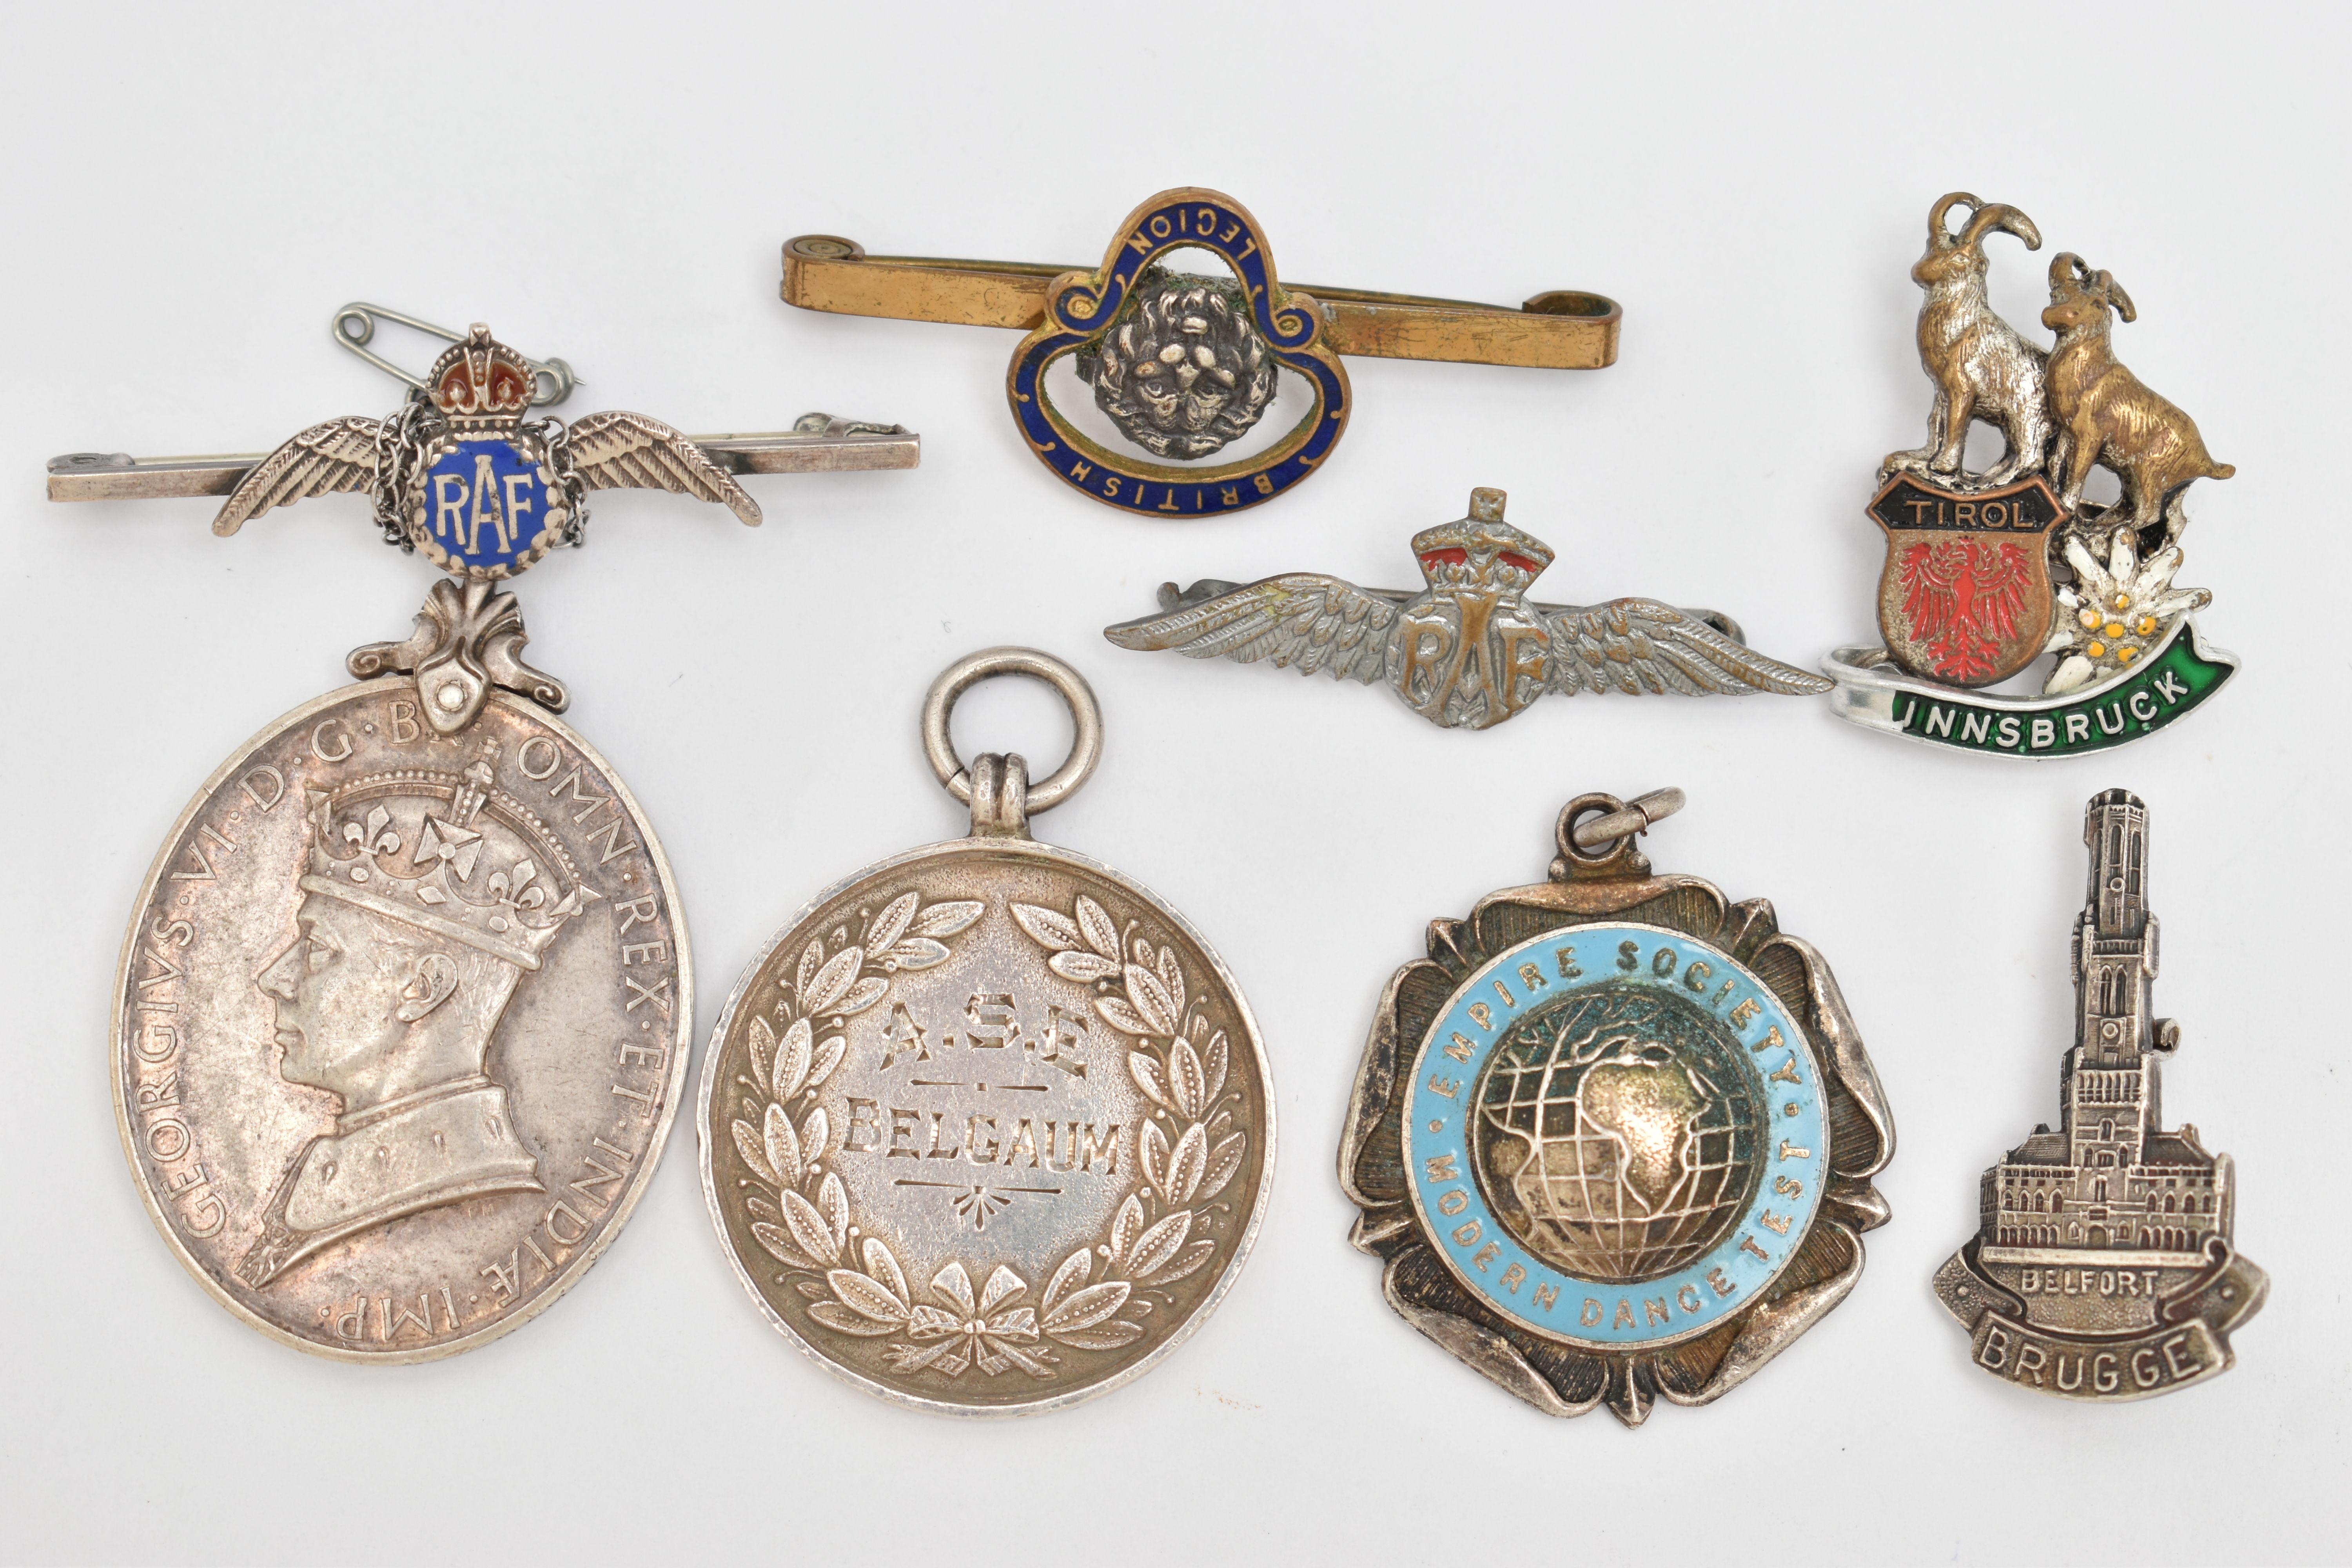 A SELECTION OF MEDALS AND BROOCHES, to include a George VI medal 'For Efficient Service,' edge